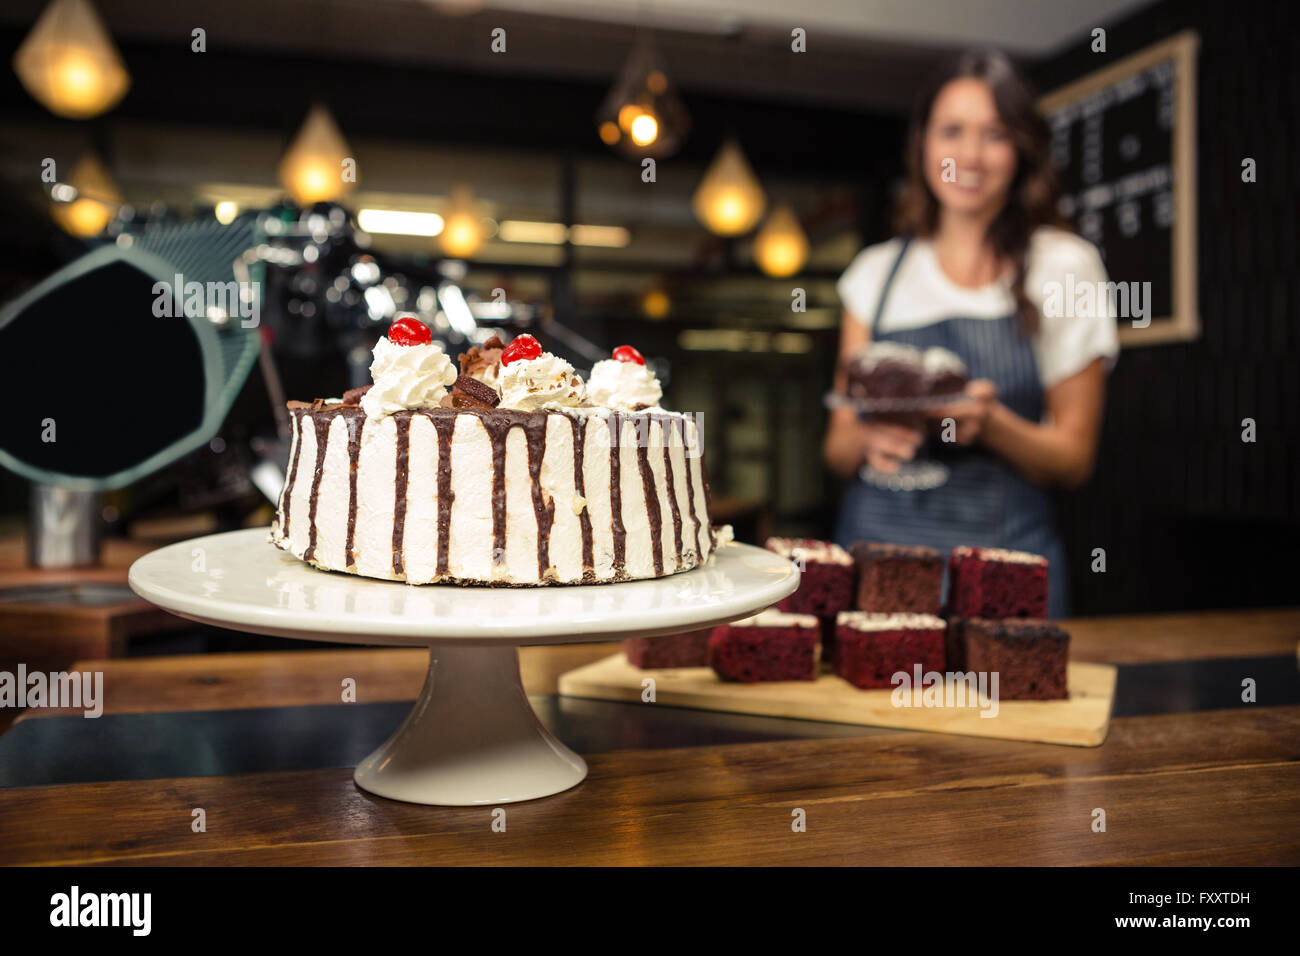 Smiling barista holding plate with cake Stock Photo